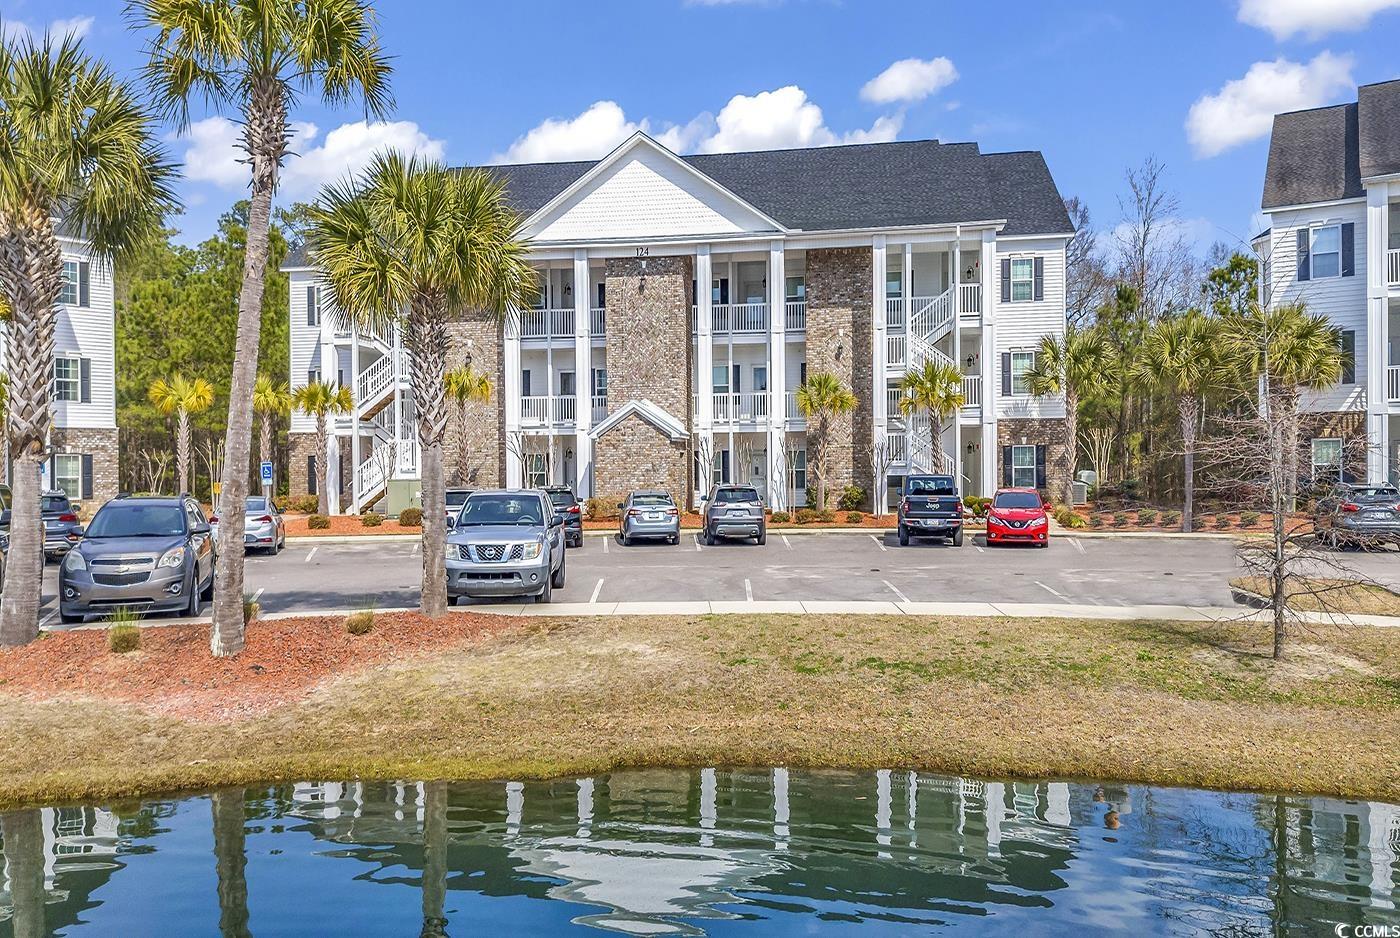 this 3 bedroom, 2 bathroom, luxury, single level, end-unit is located in the gated, carefree community of birch-n-coppice.  just 2 miles from the warm and gentle waters of the atlantic ocean. this tight-knit neighborhood is in the coastal town of surfside beach, just minutes south of myrtle beach, sc.  you enter the villa into a foyer where two bedrooms leak out to the left and the right.  continuing down the hall, you will find yourself looking into the main living area.  your eyes will be drawn to the 9 foot high, smooth ceilings, with custom crown molding in the foyer, the dining room and the living room that really lend to that open, roomy feeling. the kitchen has granite countertops, recessed and pendant lighting, staggered-42" soft-close cabinets and stainless steel appliances.  the three door, french style refrigerator does convey to the new owners.   the screened in back balcony overlooks a peaceful pond and woods creating a serene and private place to relax.  the primary suite is in the rear of the villa, with its primary bathroom featuring a undermounted double sinks and a step in shower with double seating. granite vanity tops and comfort height toilets in both bathrooms. it's well known that people are all about a safe community with a gated entrance, centrally located, private amenities and luxury lifestyle. here at birch-n-coppice, you have it all.  for in person showings, contact the listing agent or your realtor.  easy to see. all offers with a financing contingency will need a preapproval letter from their lender.